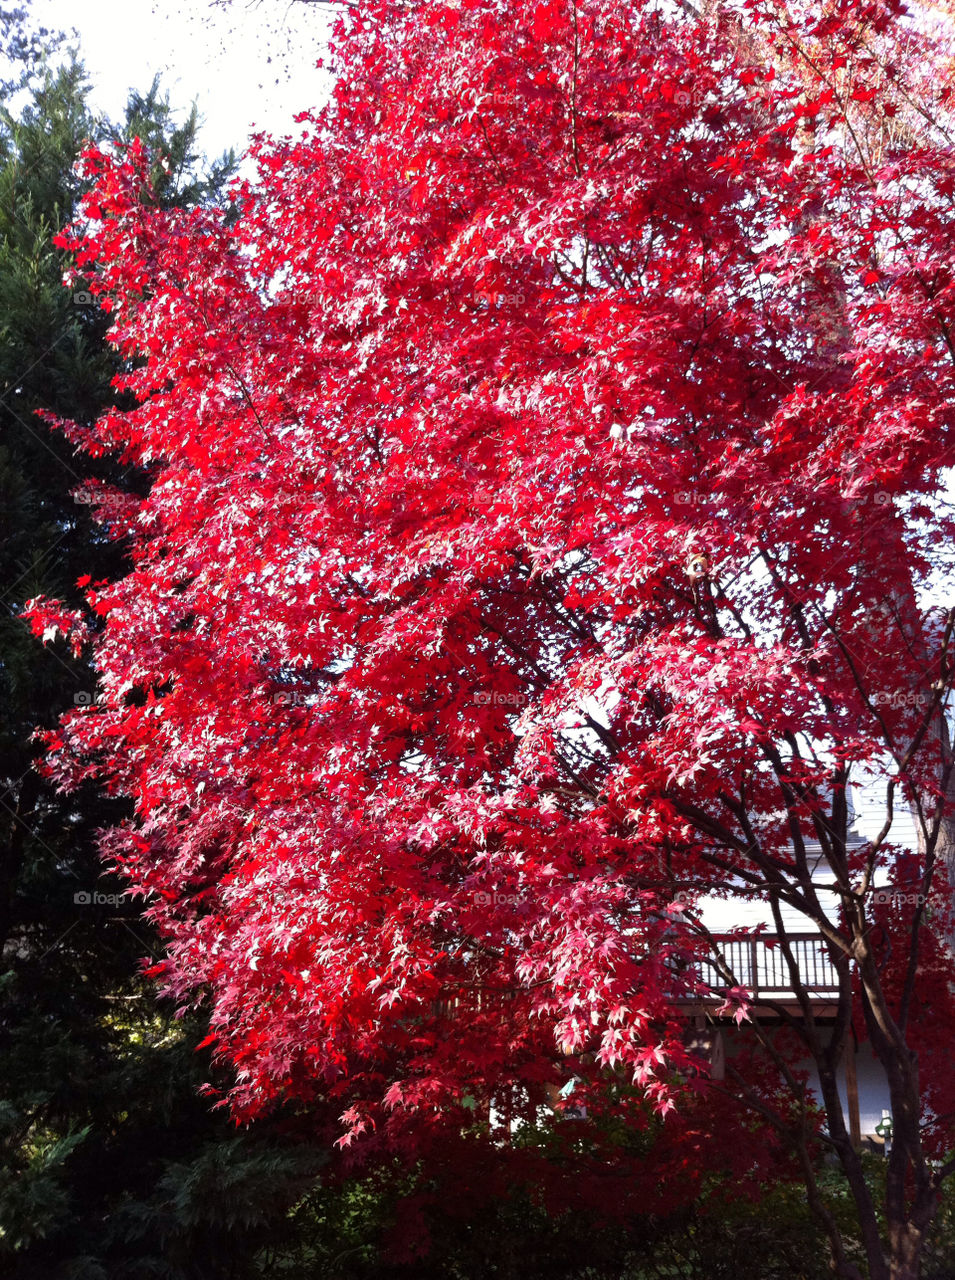 Japanese maple on fire